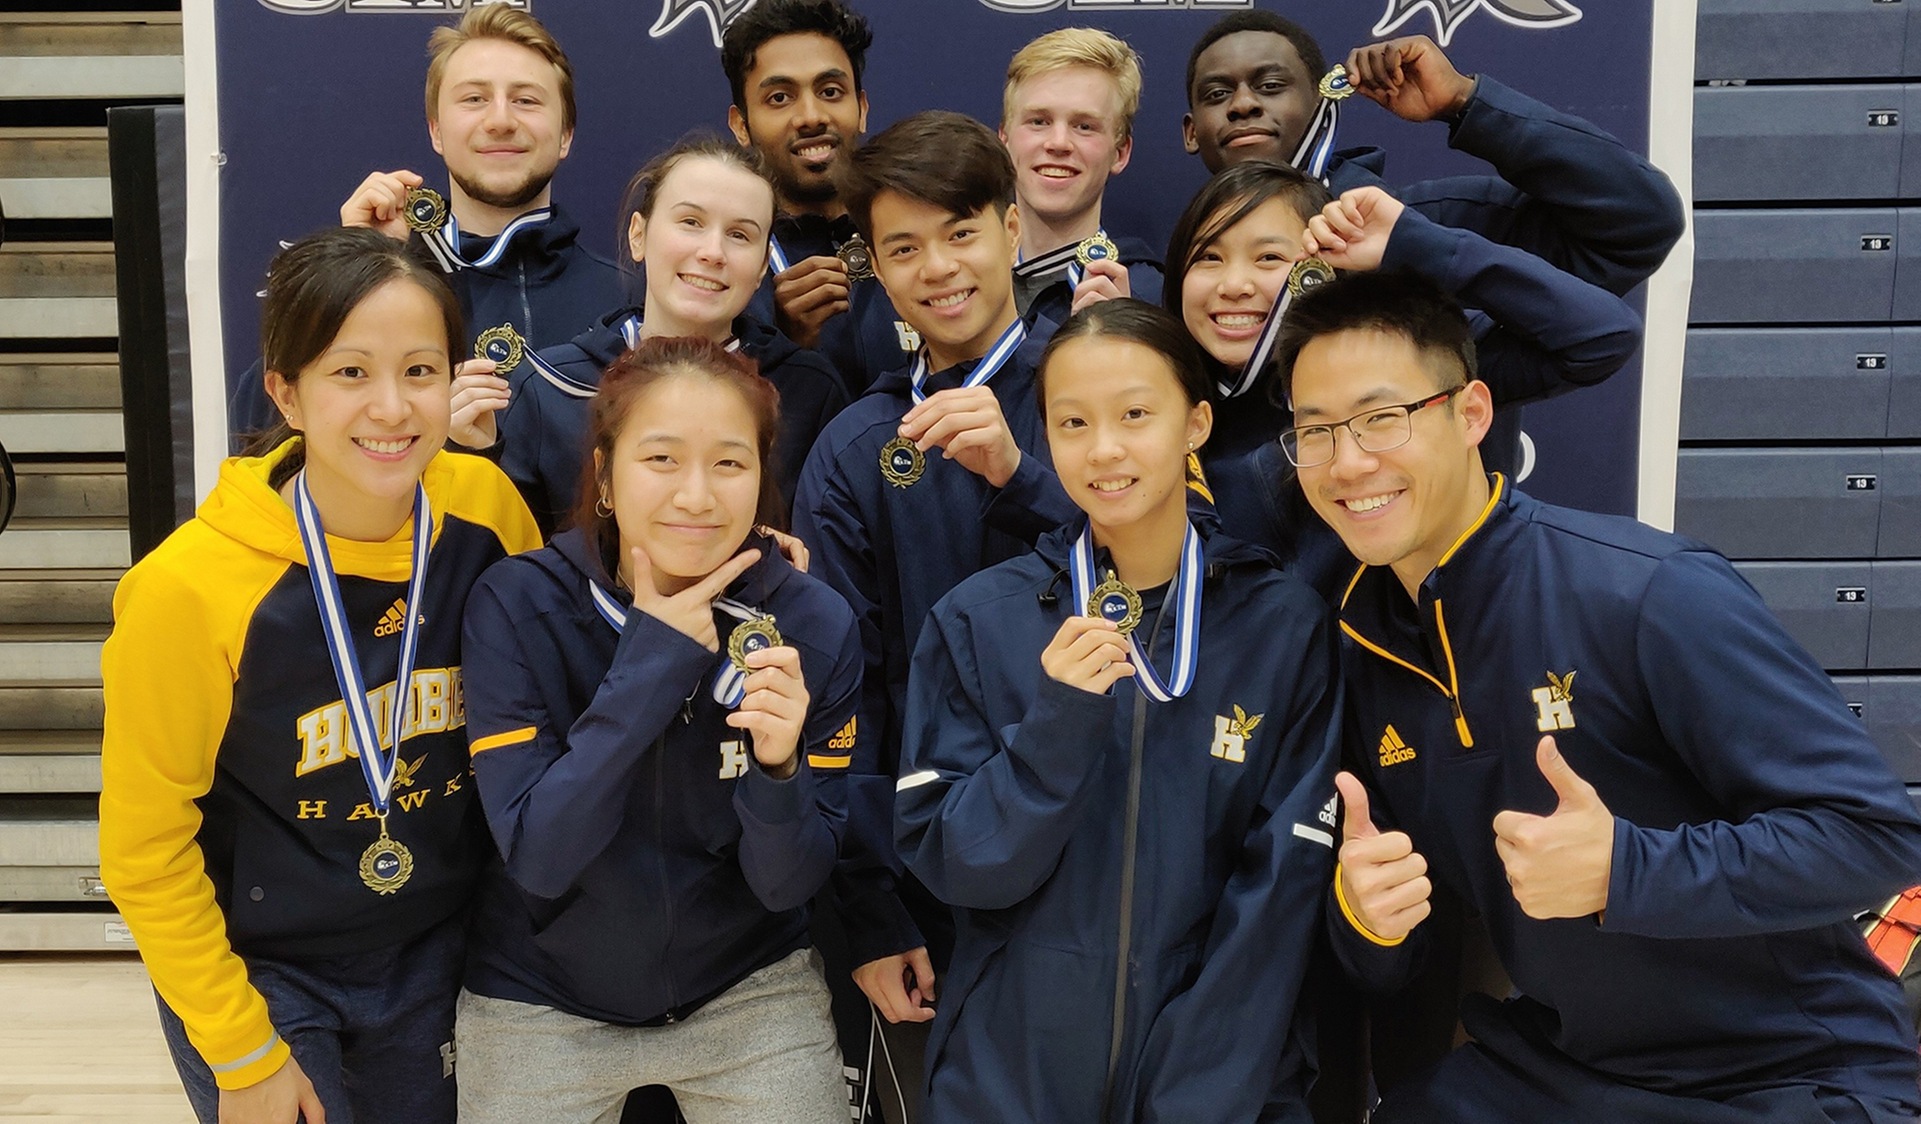 HAWKS BADMINTON ROLL TO VICTORY IN TEAM BADMINTON EVENT AT UTM